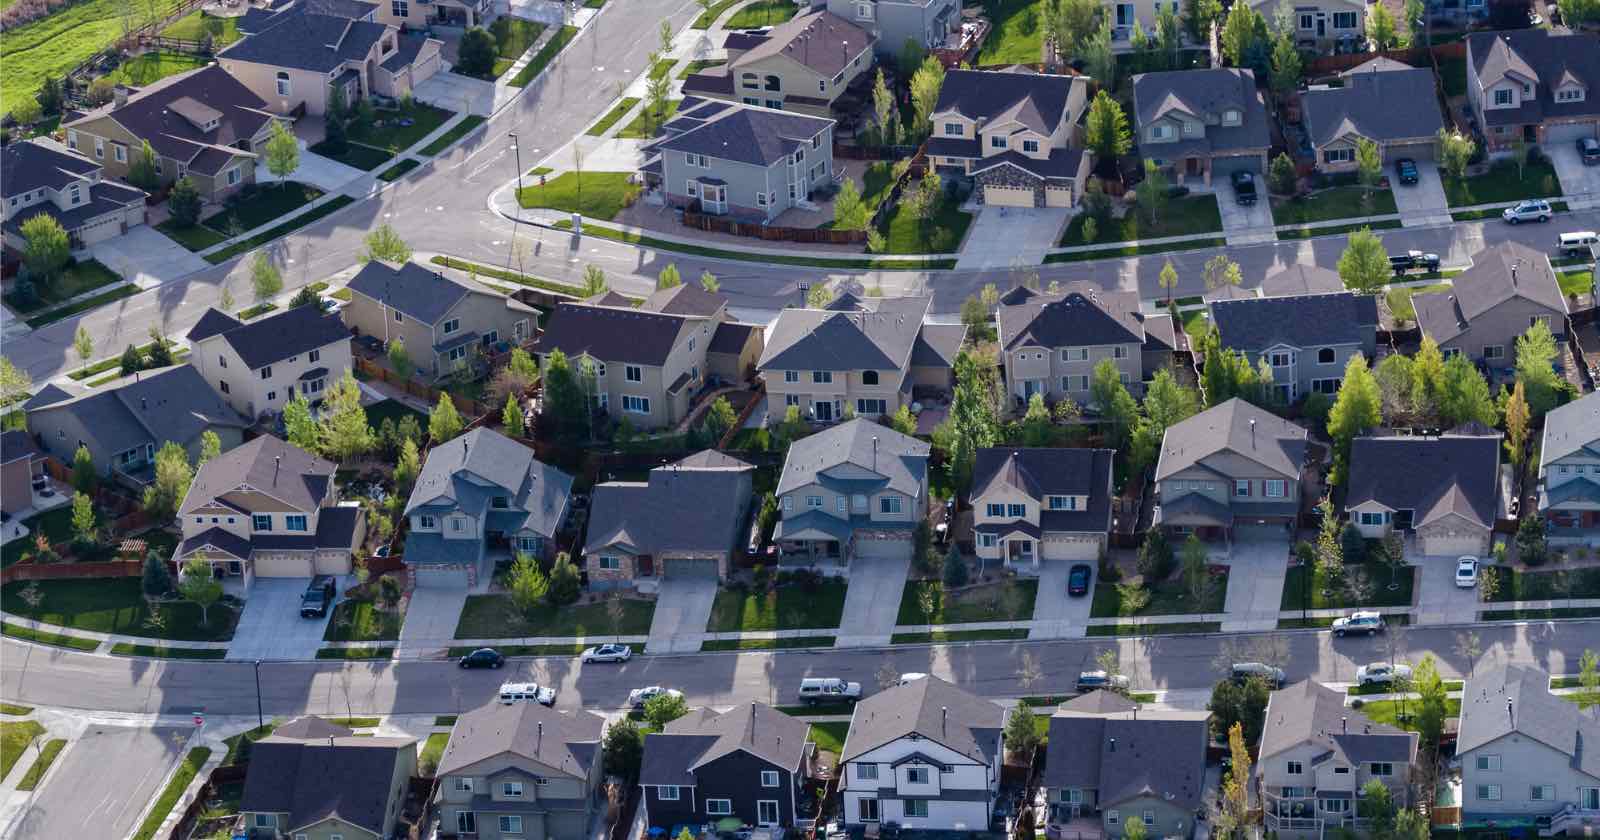 Home insurance companies are secretly taking photos of private residences with drones, surveillance balloons, and even manned planes to find reasons t